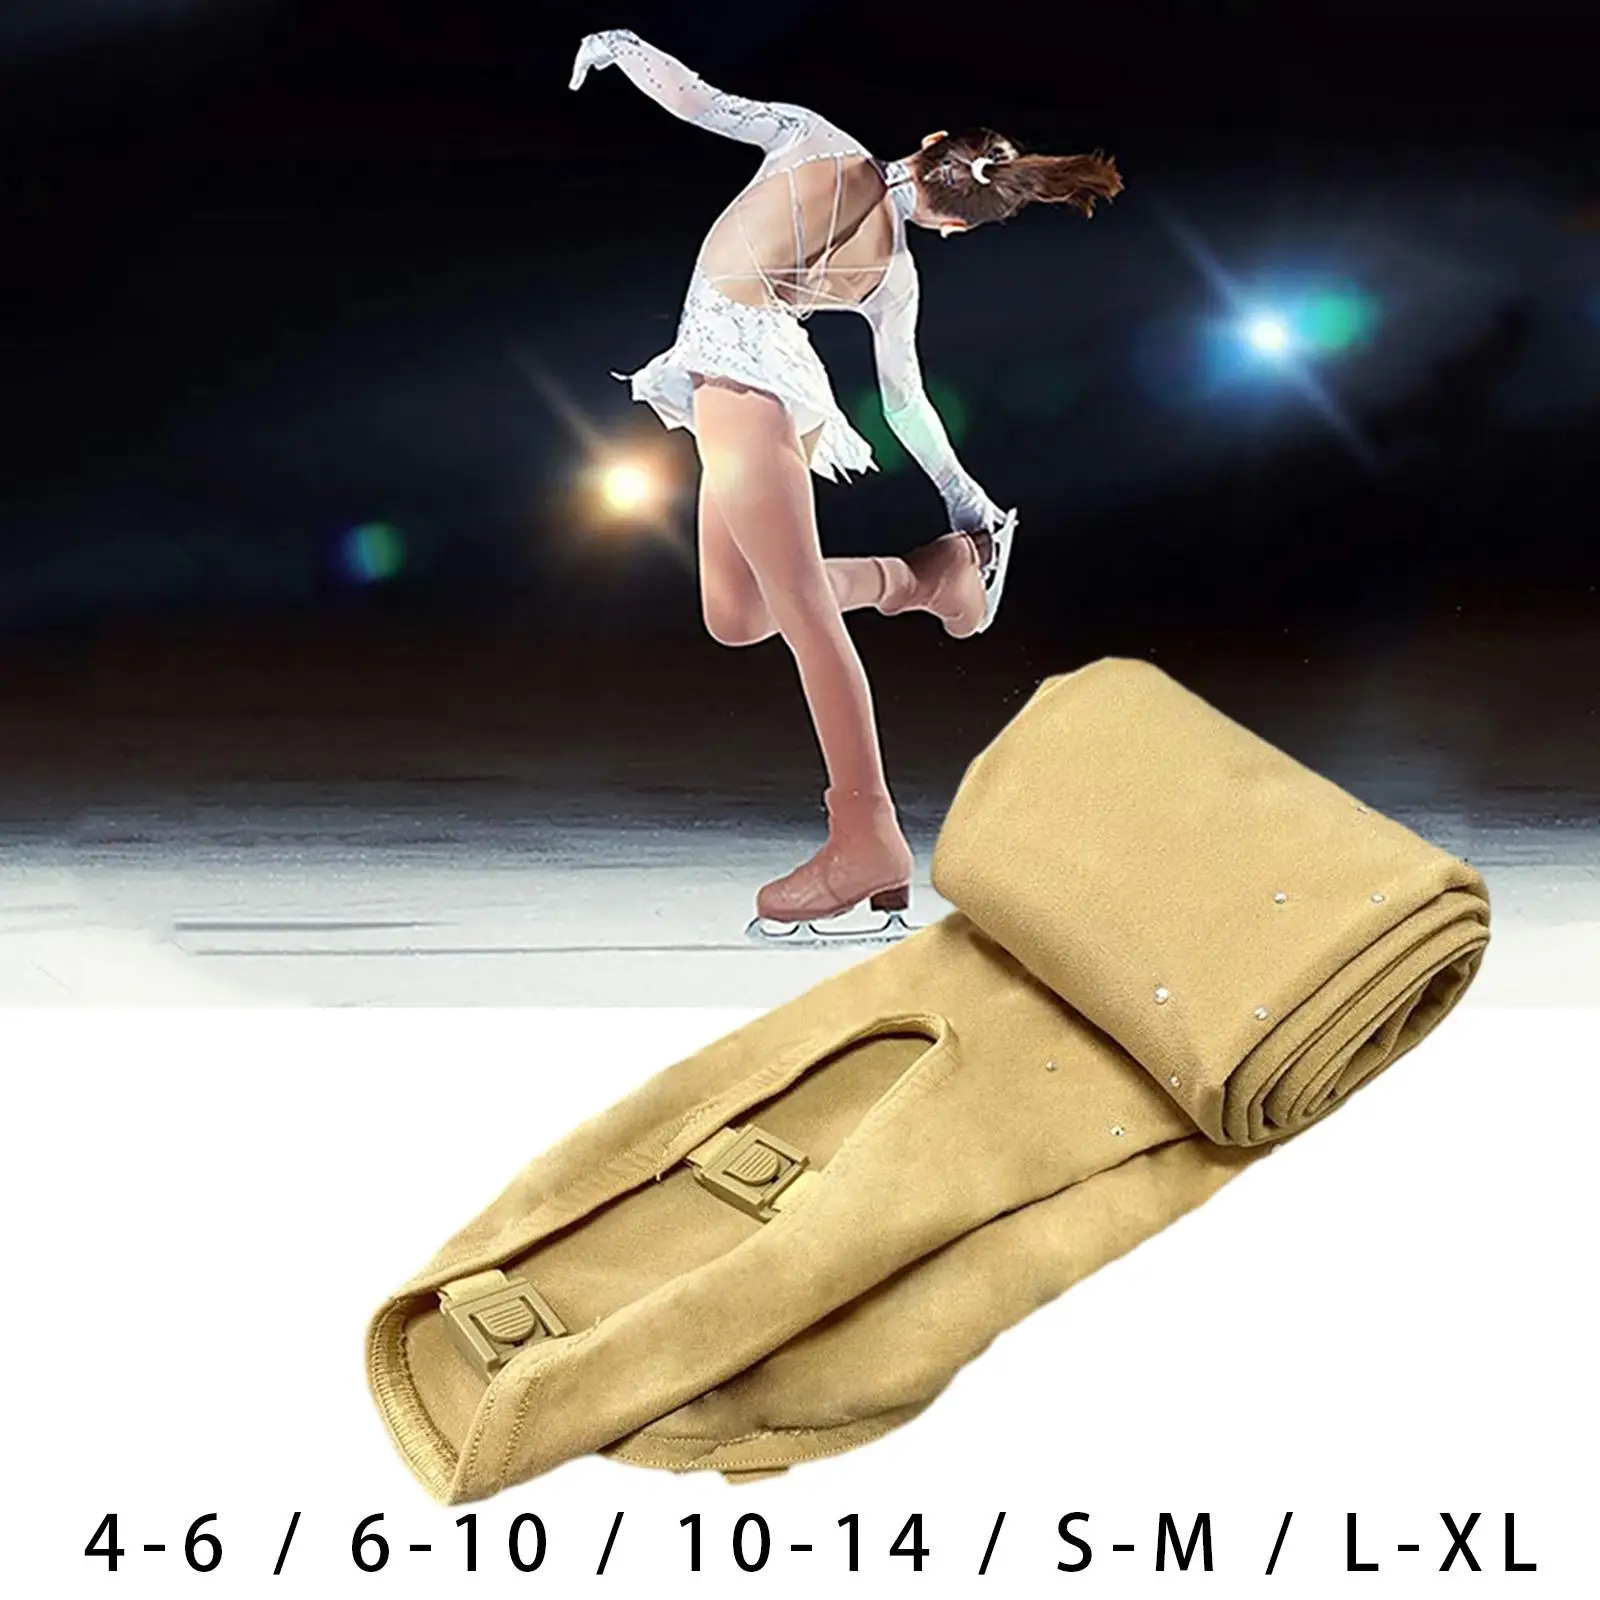 Figure Skating Pantyhose Women Girls Outfit Stockings Activewear Clothes Thickness Thermal Pants Ice Skating Tights for Training